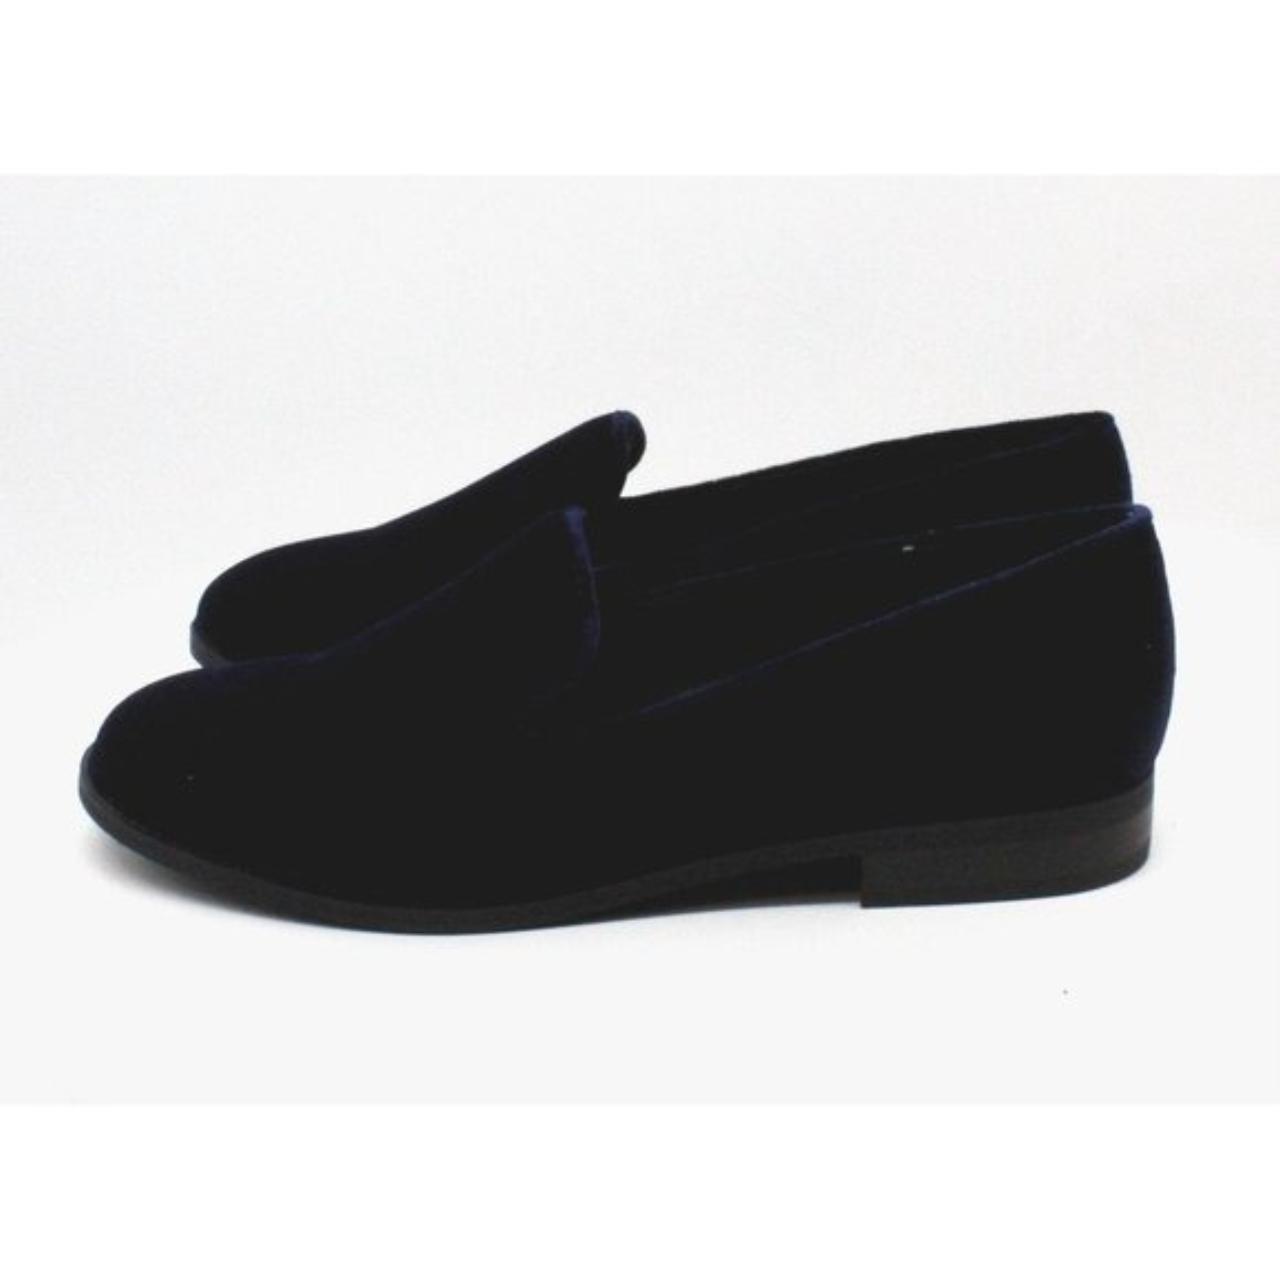 Product Image 4 - Bandolino Lima Loafers Women's Shoes

These